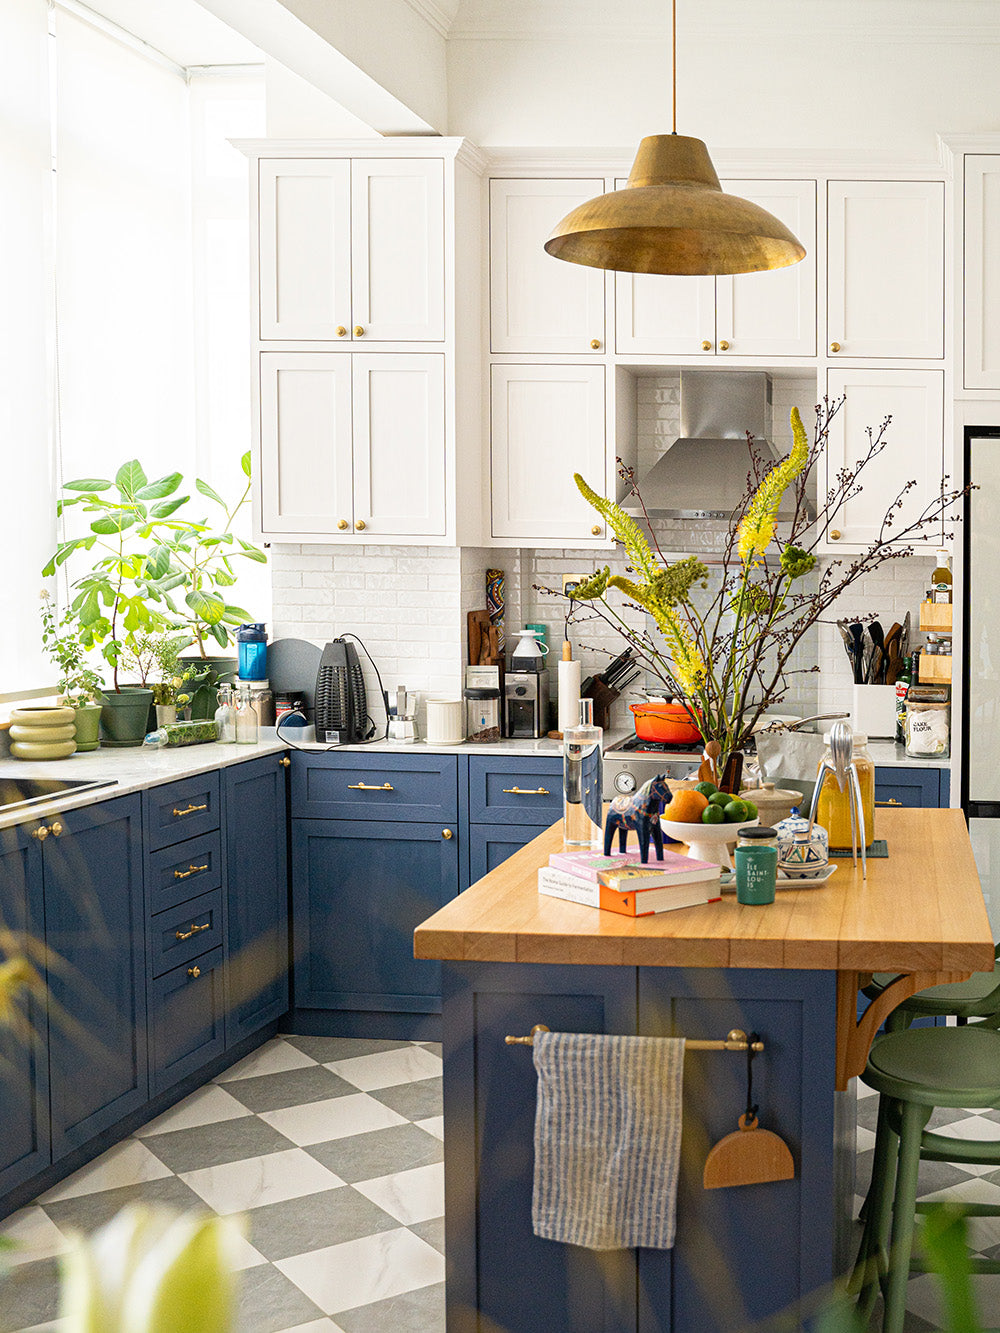 Kitchen space with plants and collectables as home decor